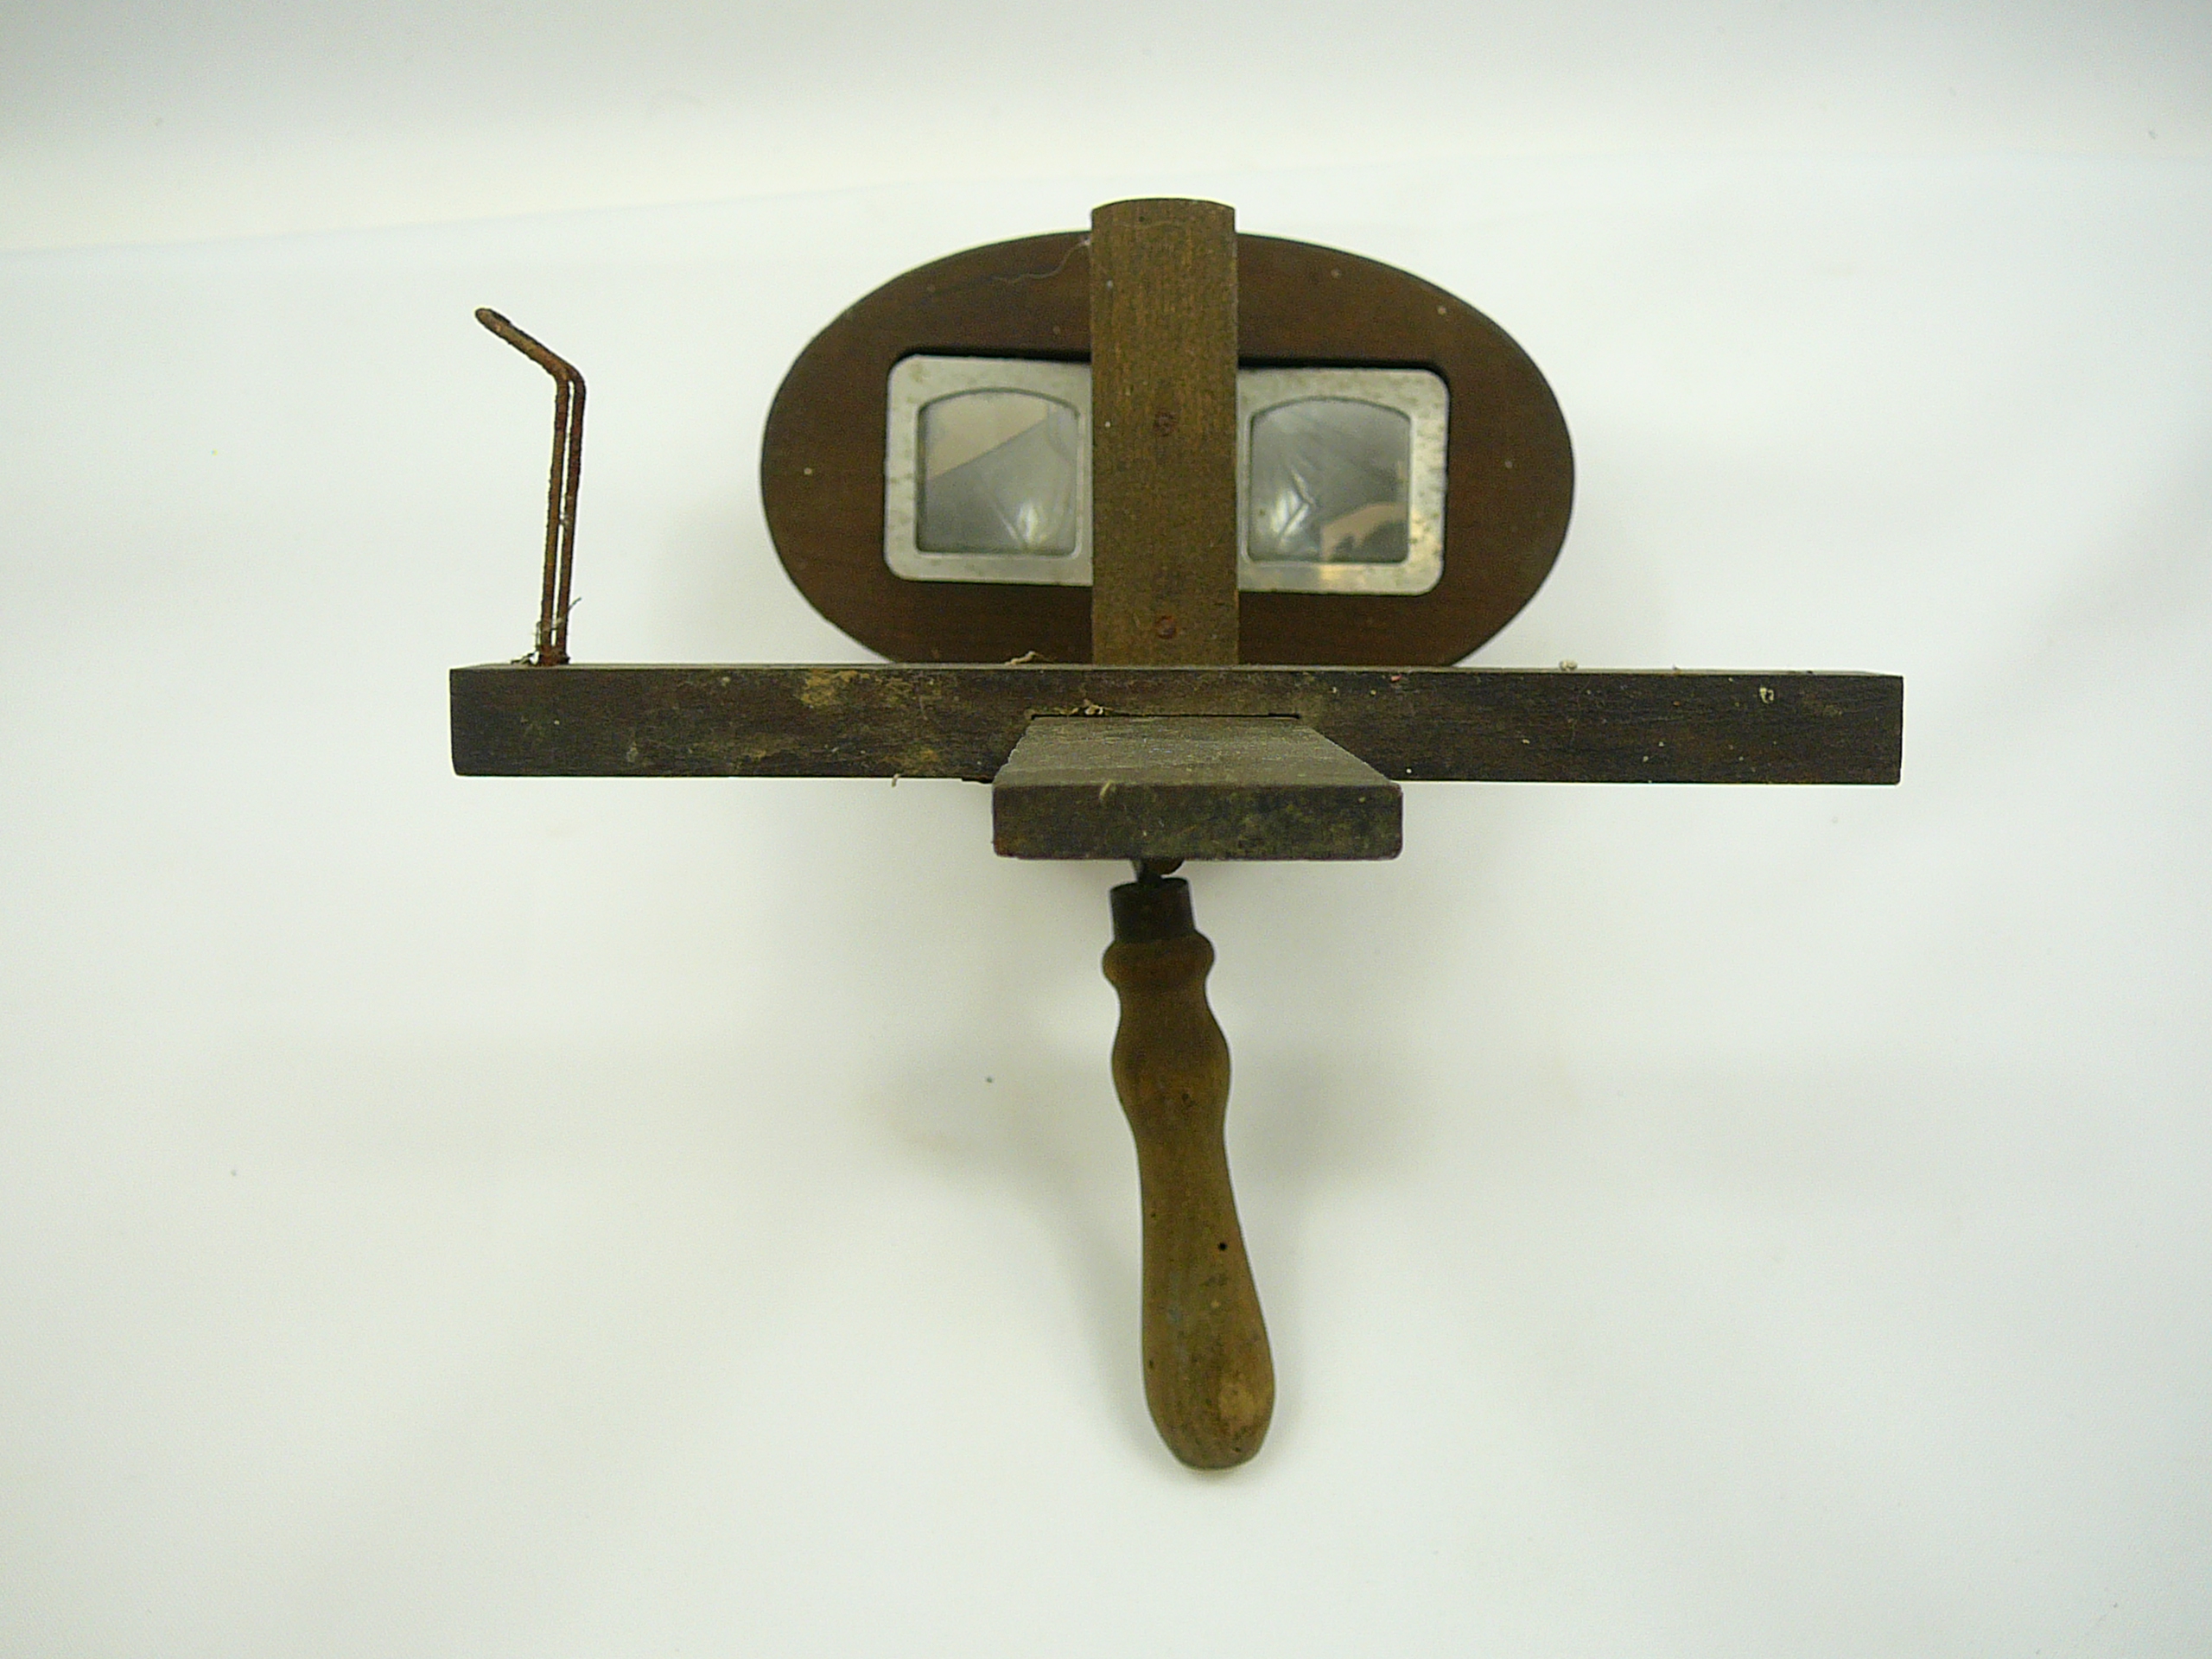 19th cent French Stereoscope - Image 3 of 5